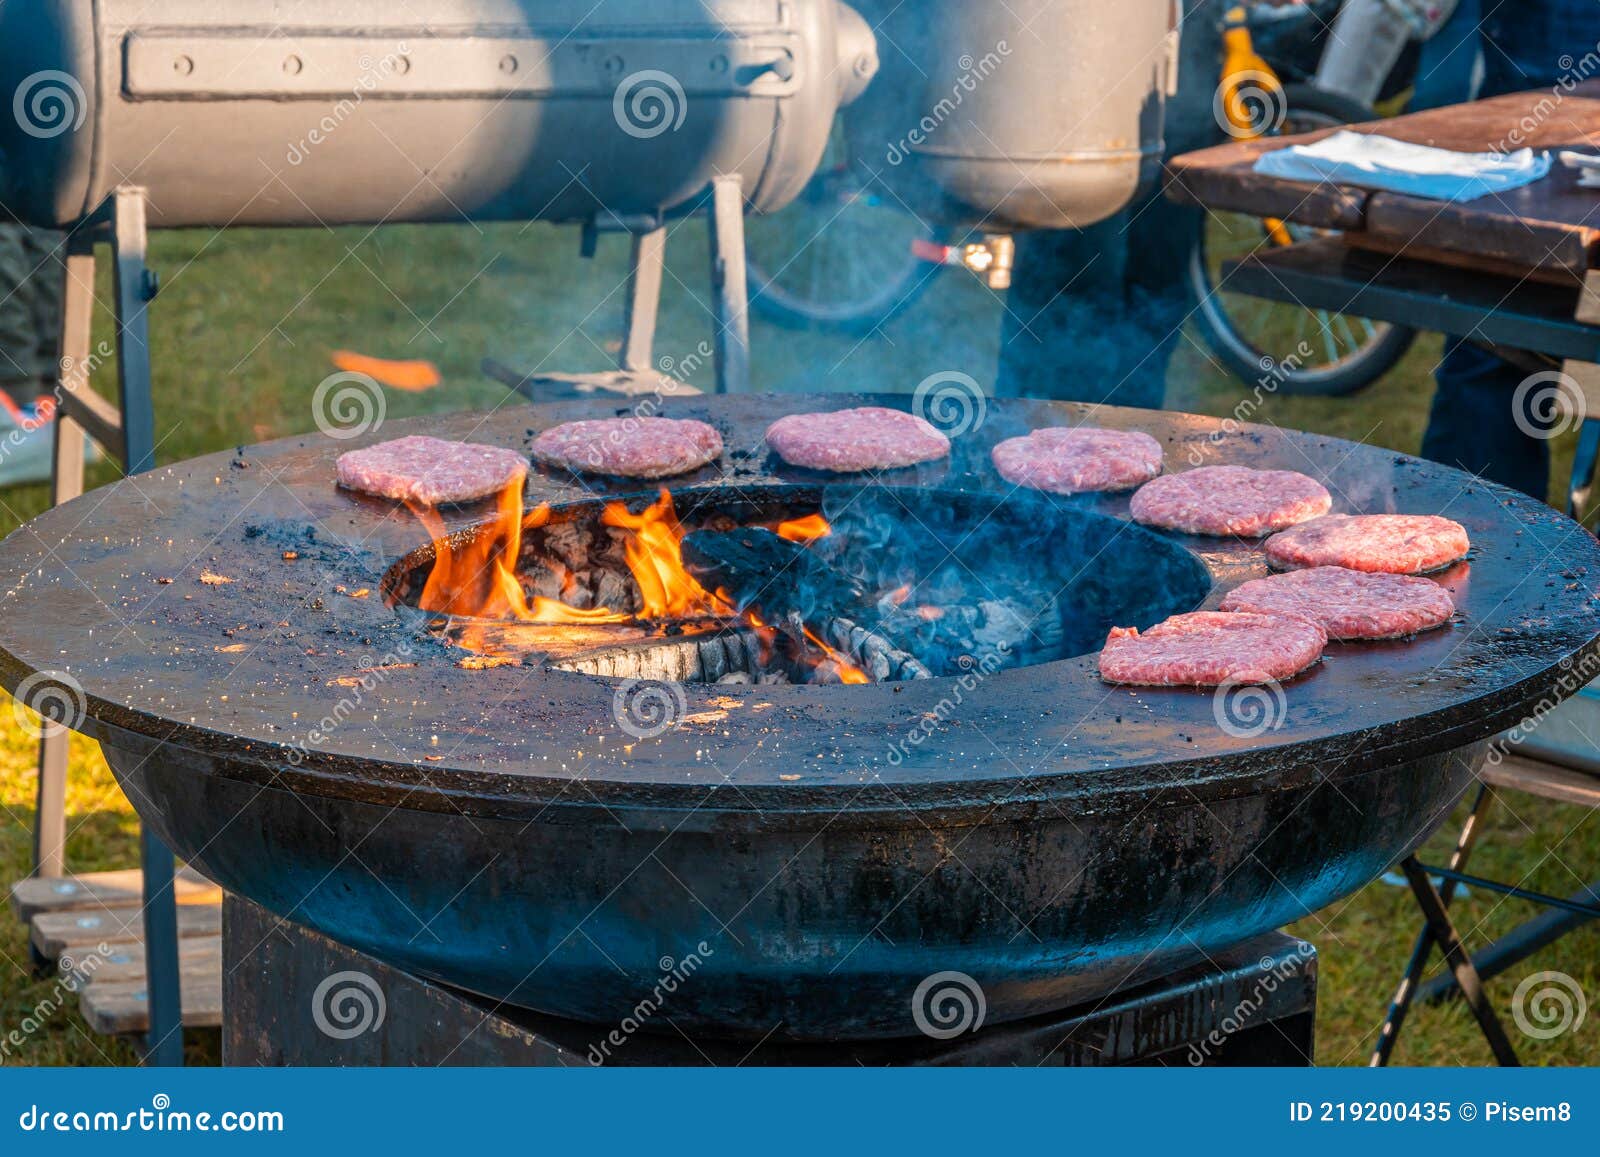 A Large Round Grill Stock Image - Image of catering, classic: 219200435